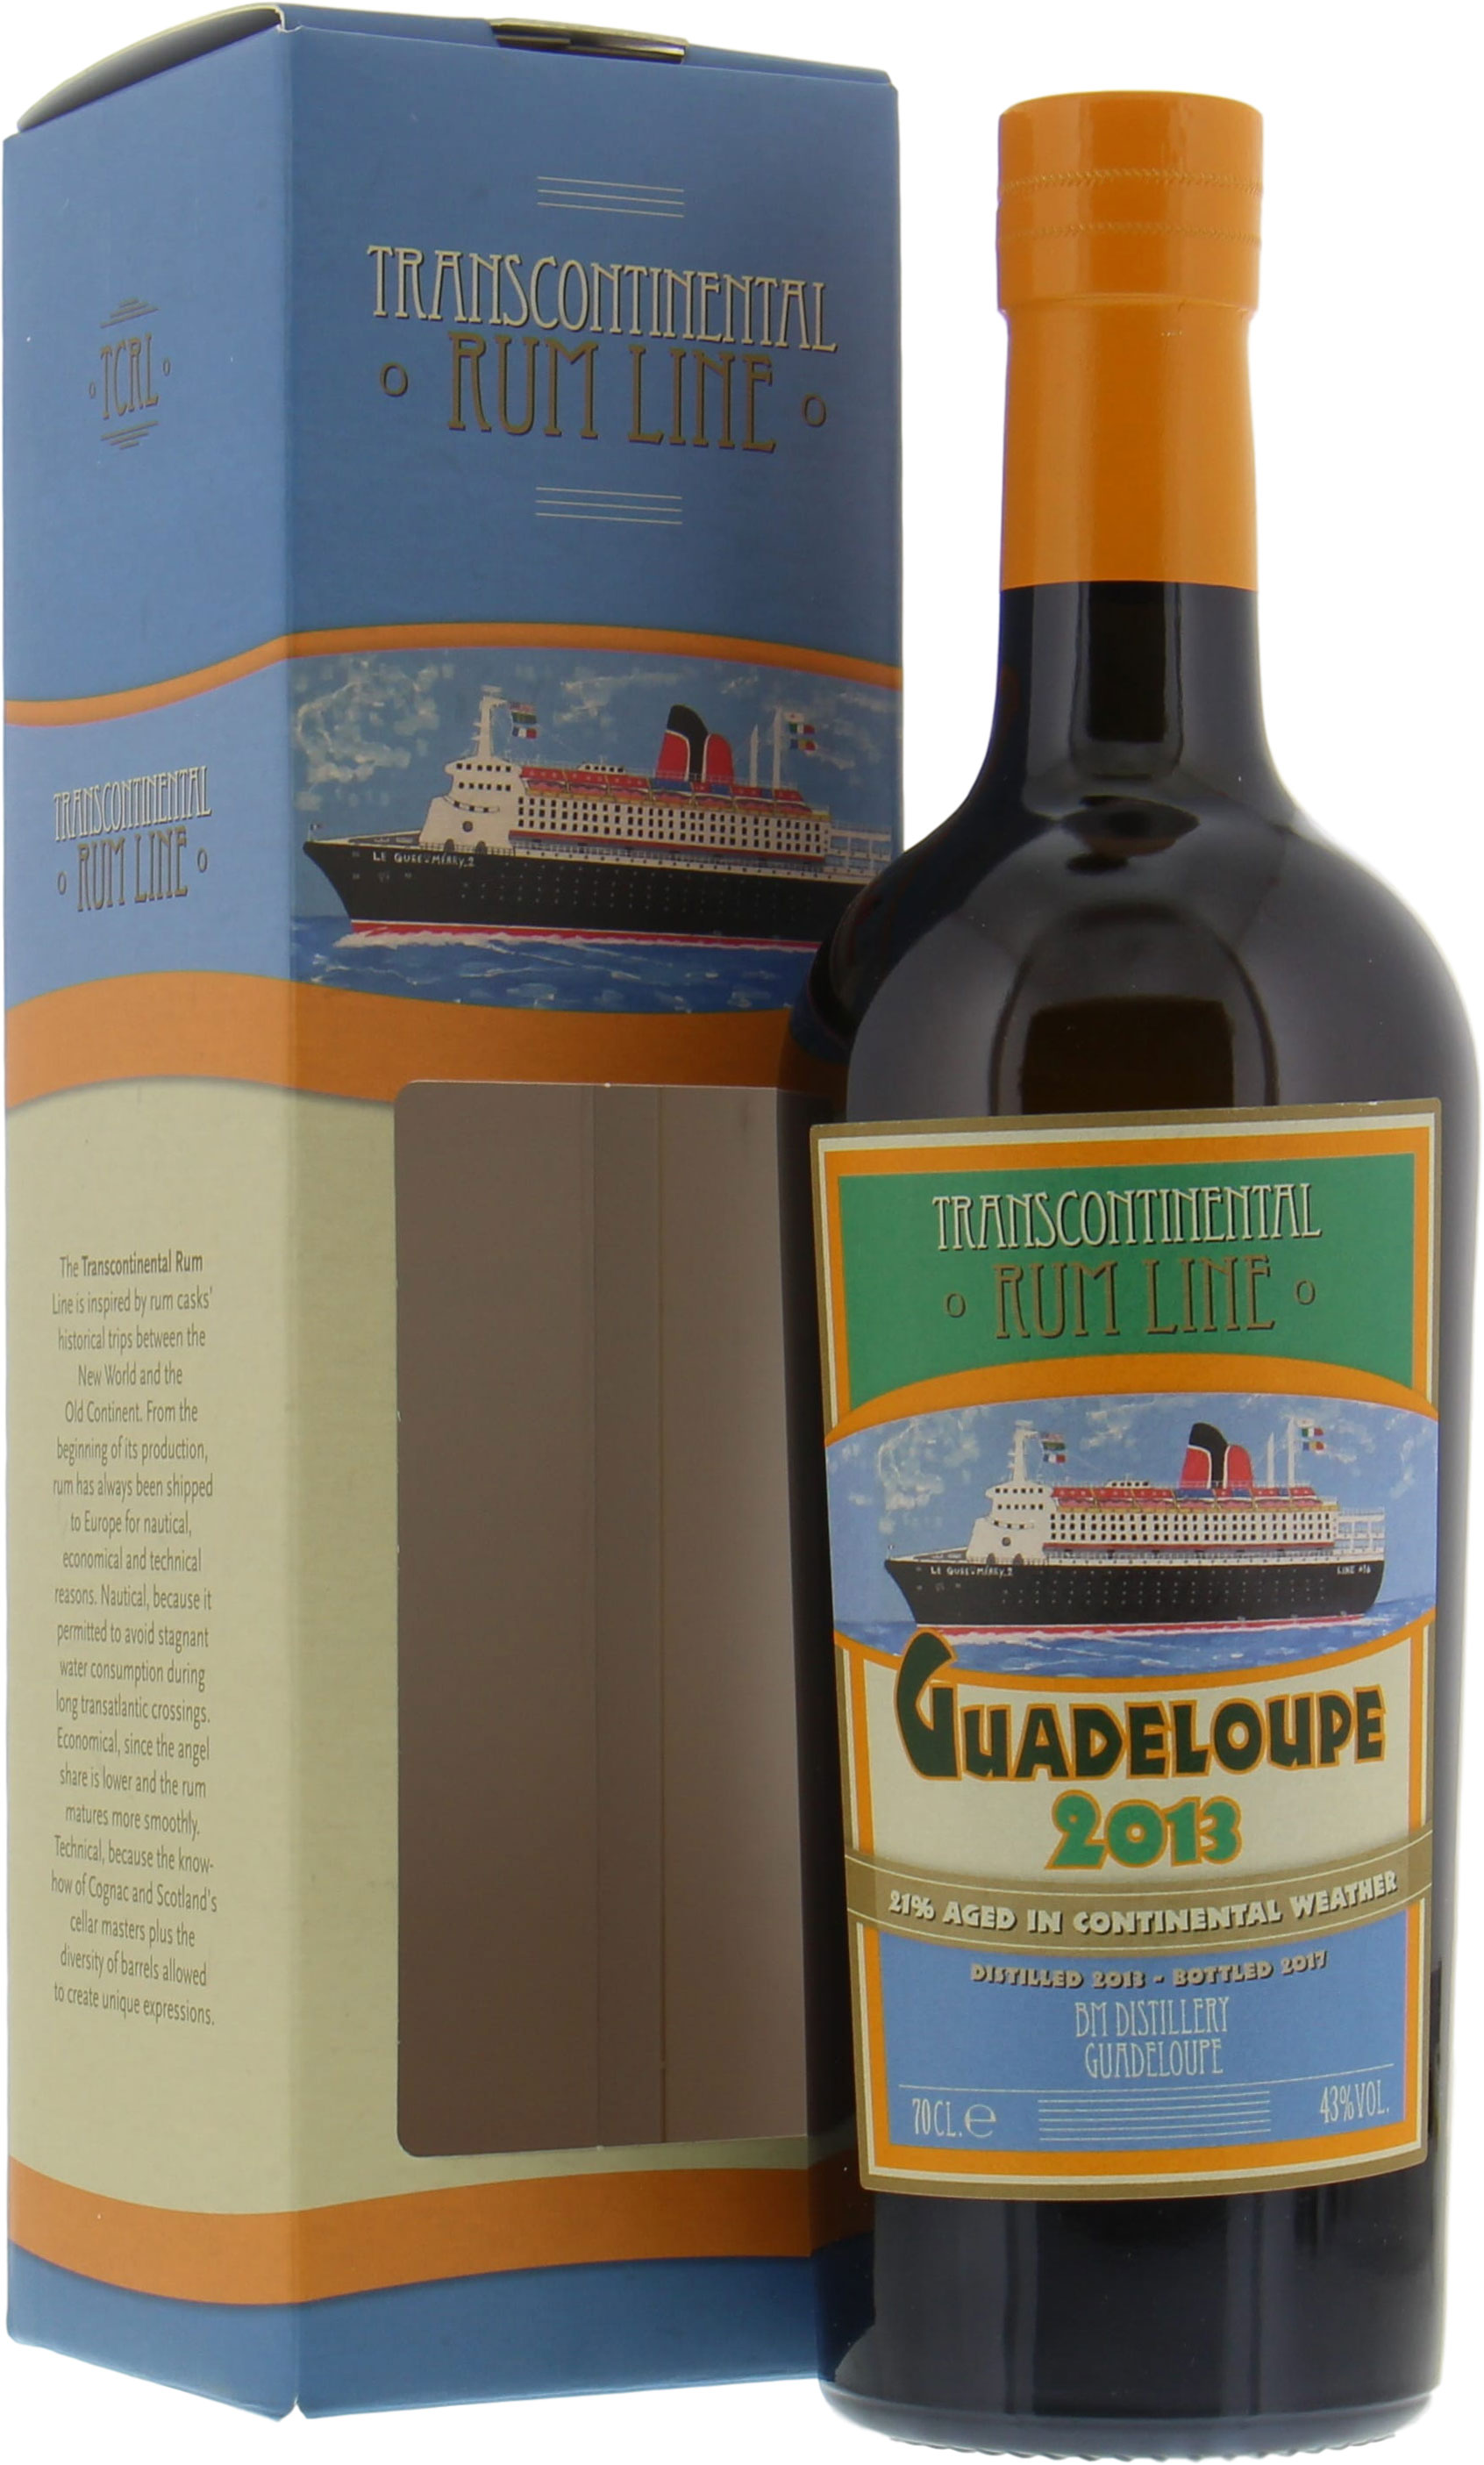 Transcontinental Rum Line - Guadeloupe Limited Edition 43% 2013 In Original Container